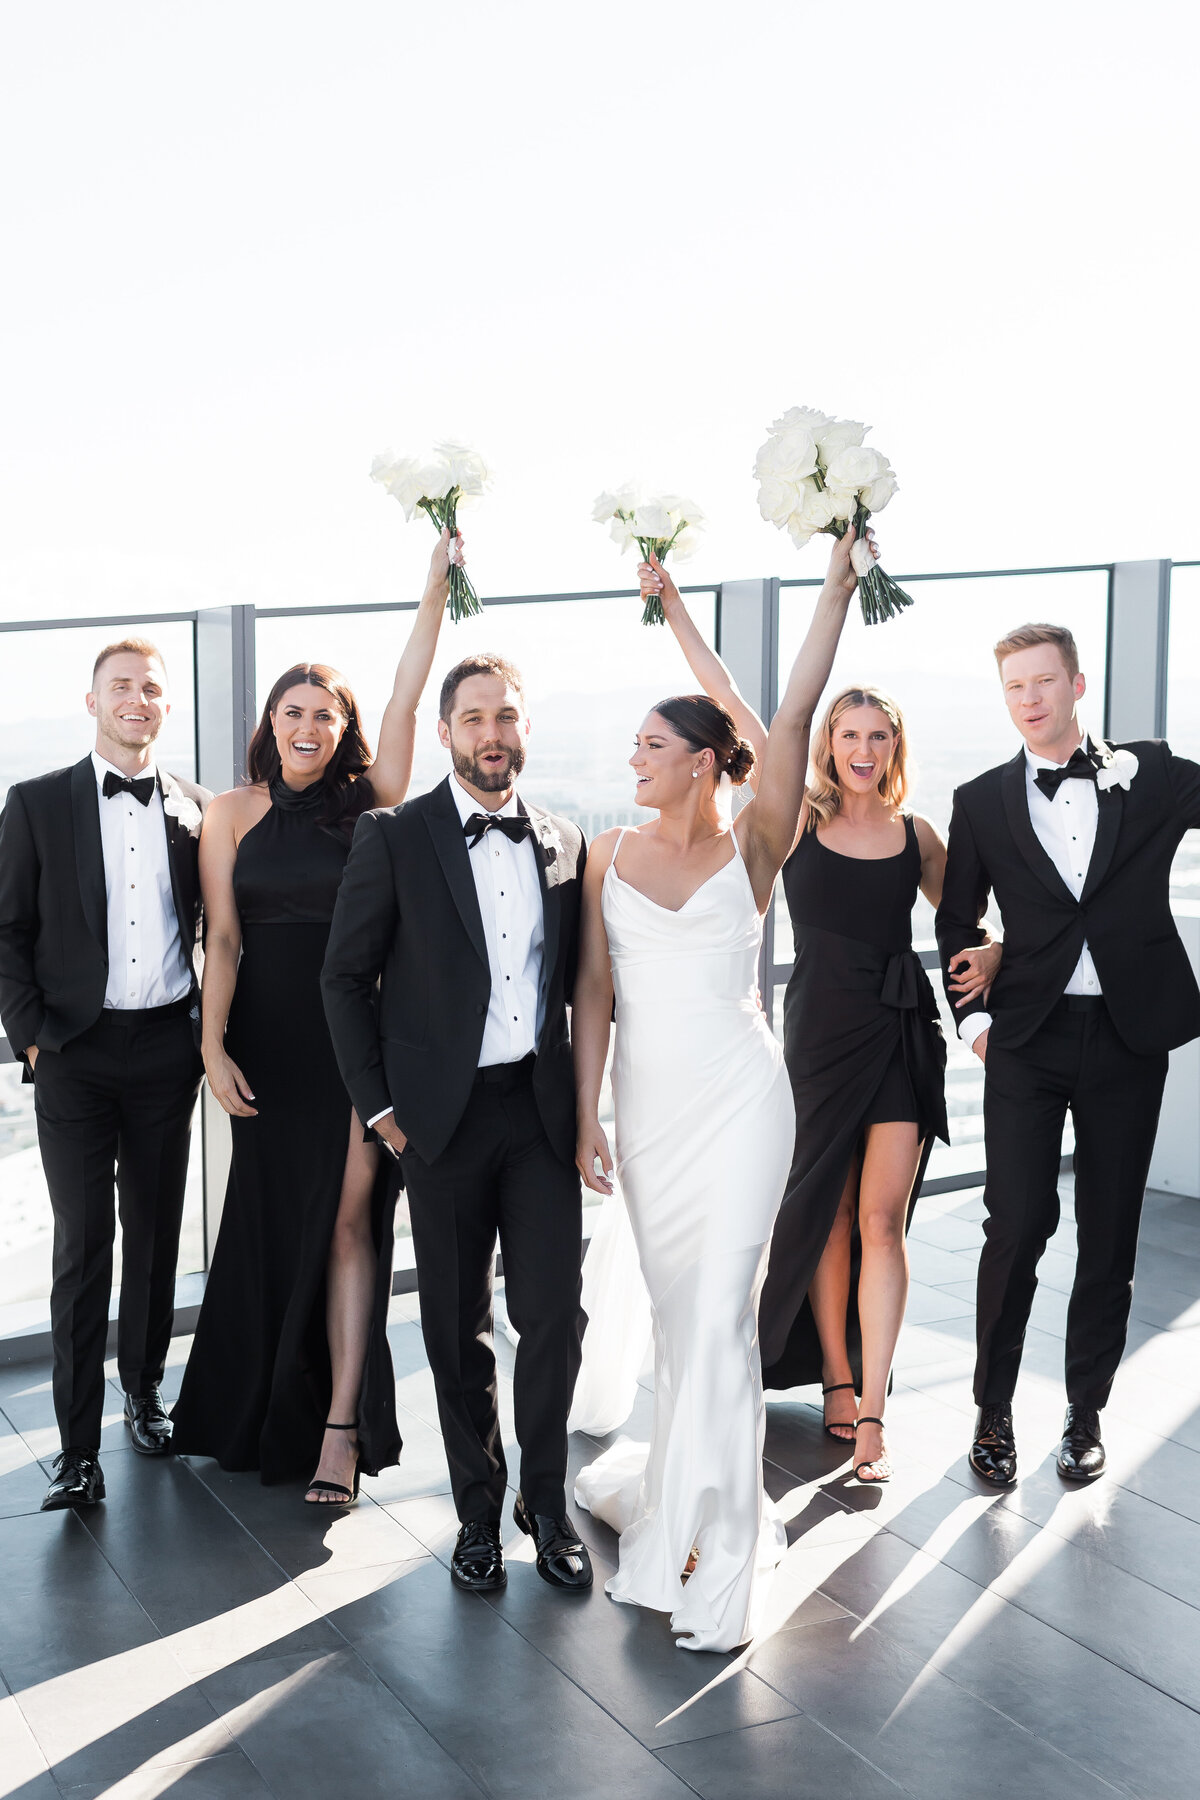 Luxe Black and White Wedding at Palms Casino Resort in Las Vegas - 23